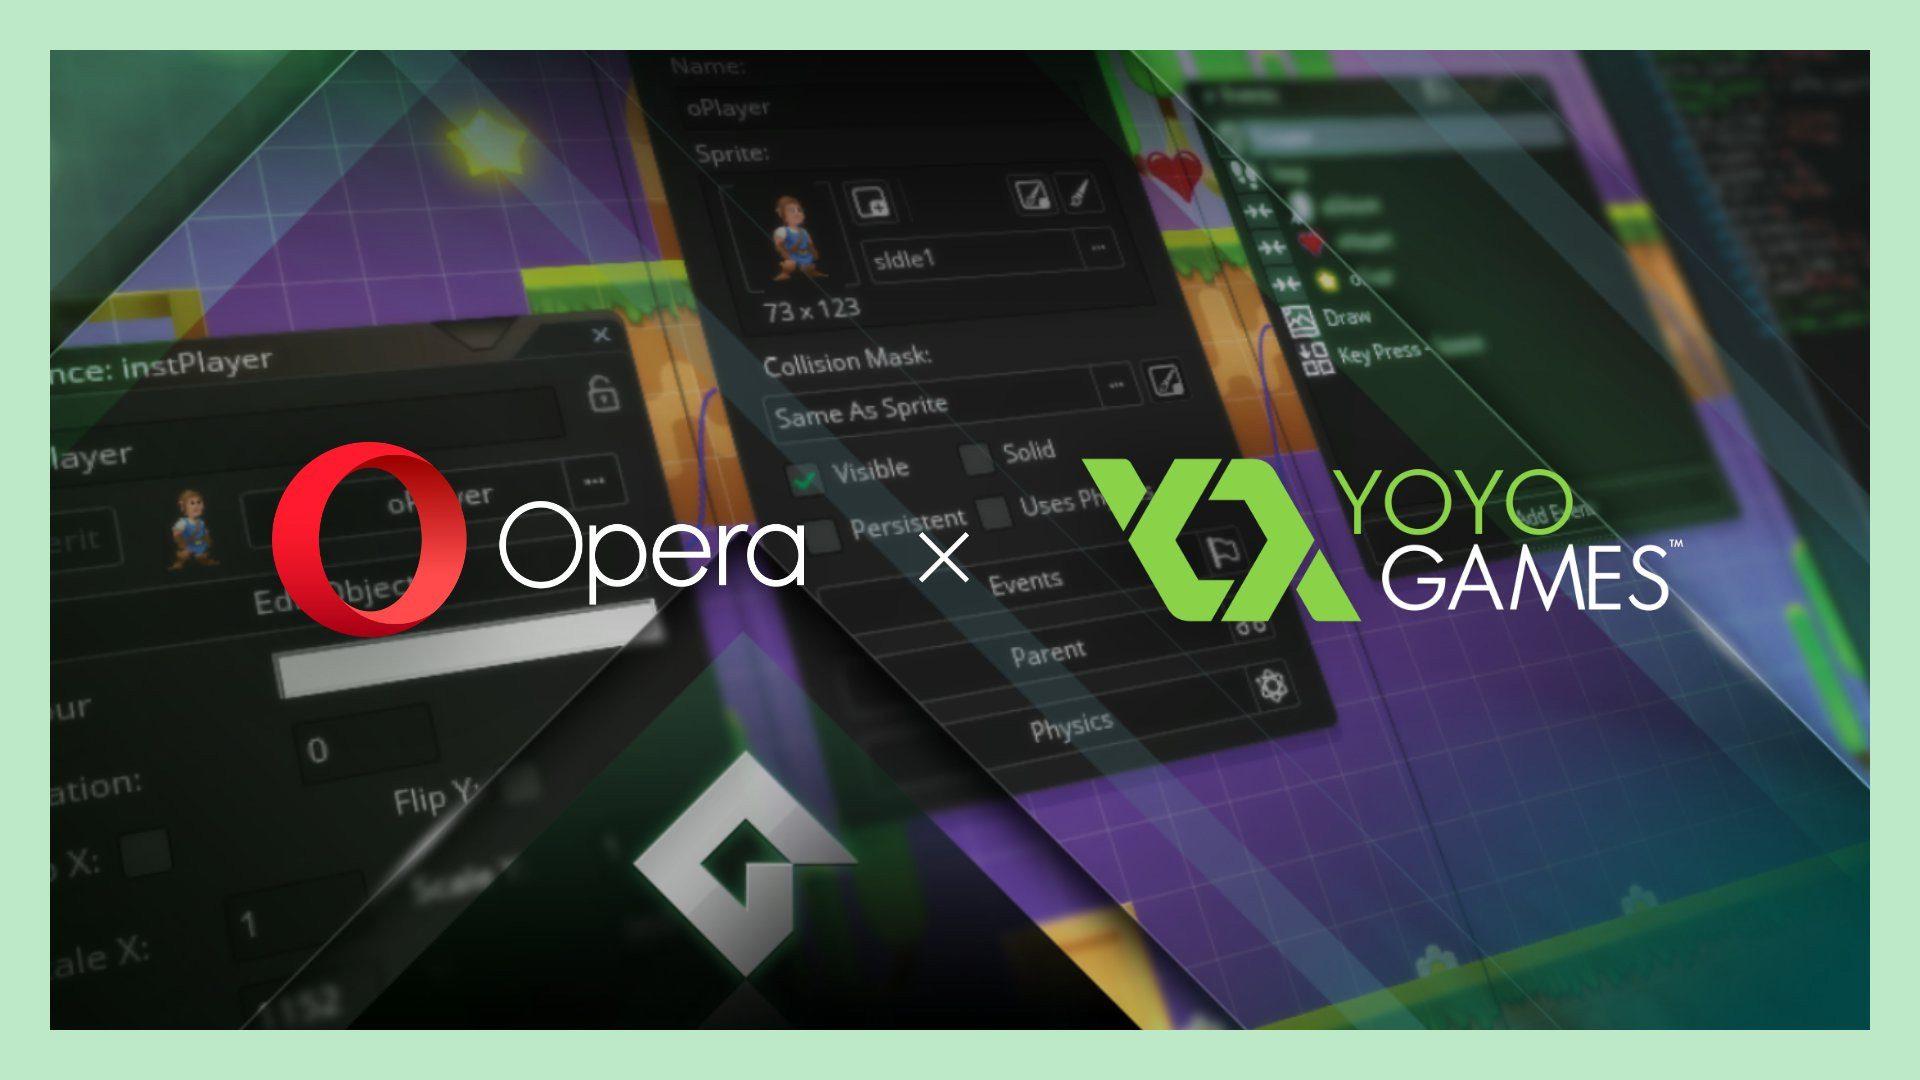 GameMaker Studio 2 launches support for PS5 and Xbox Series X